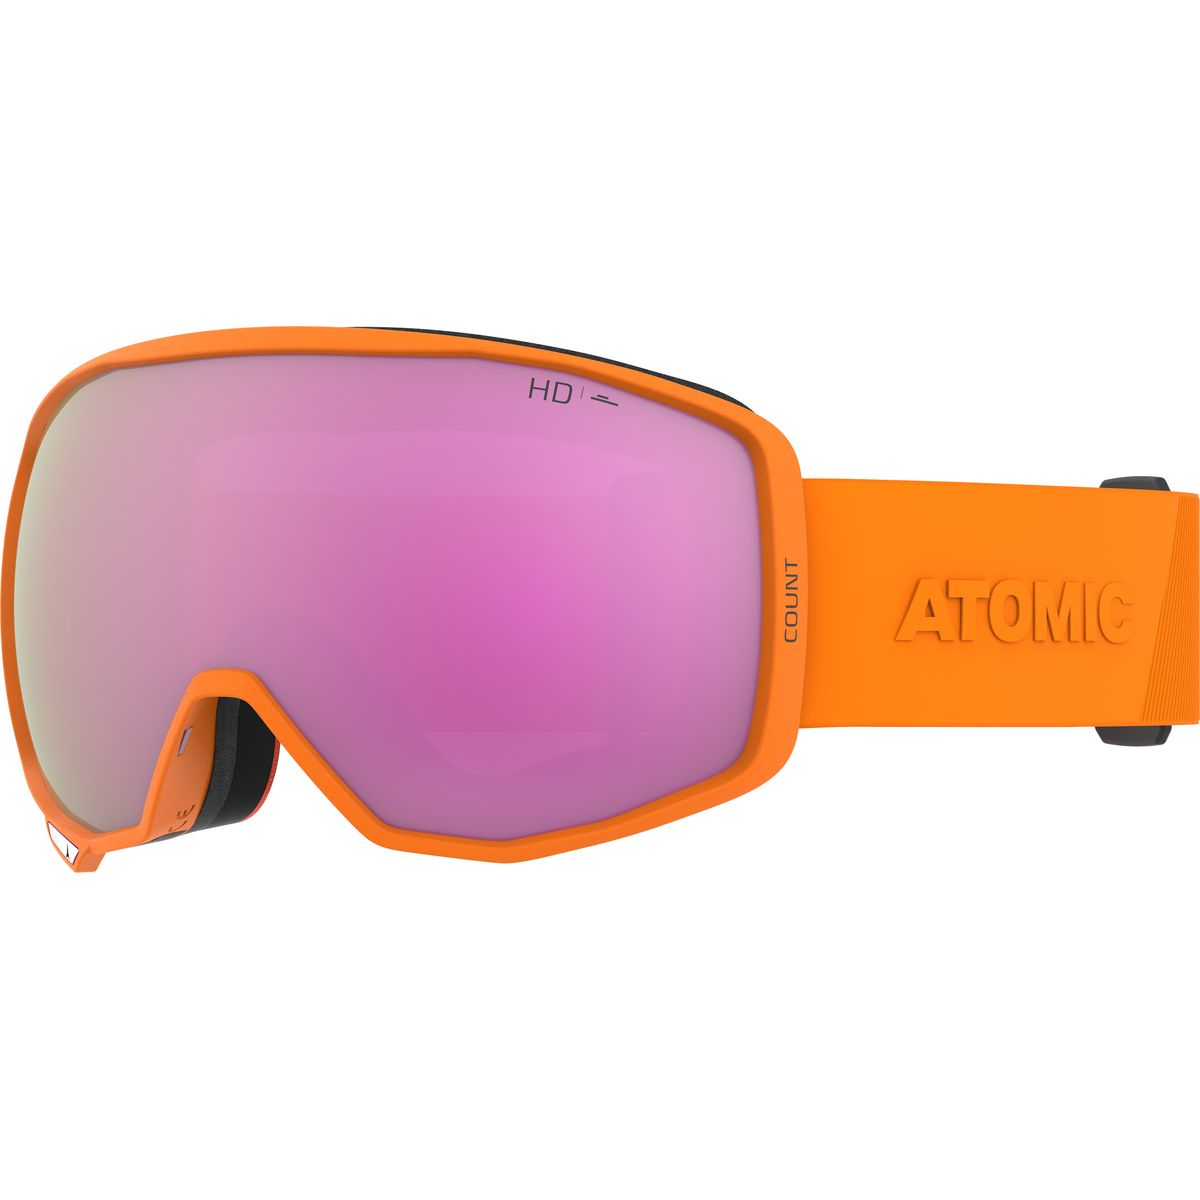 Atomic Count HD Skibrille